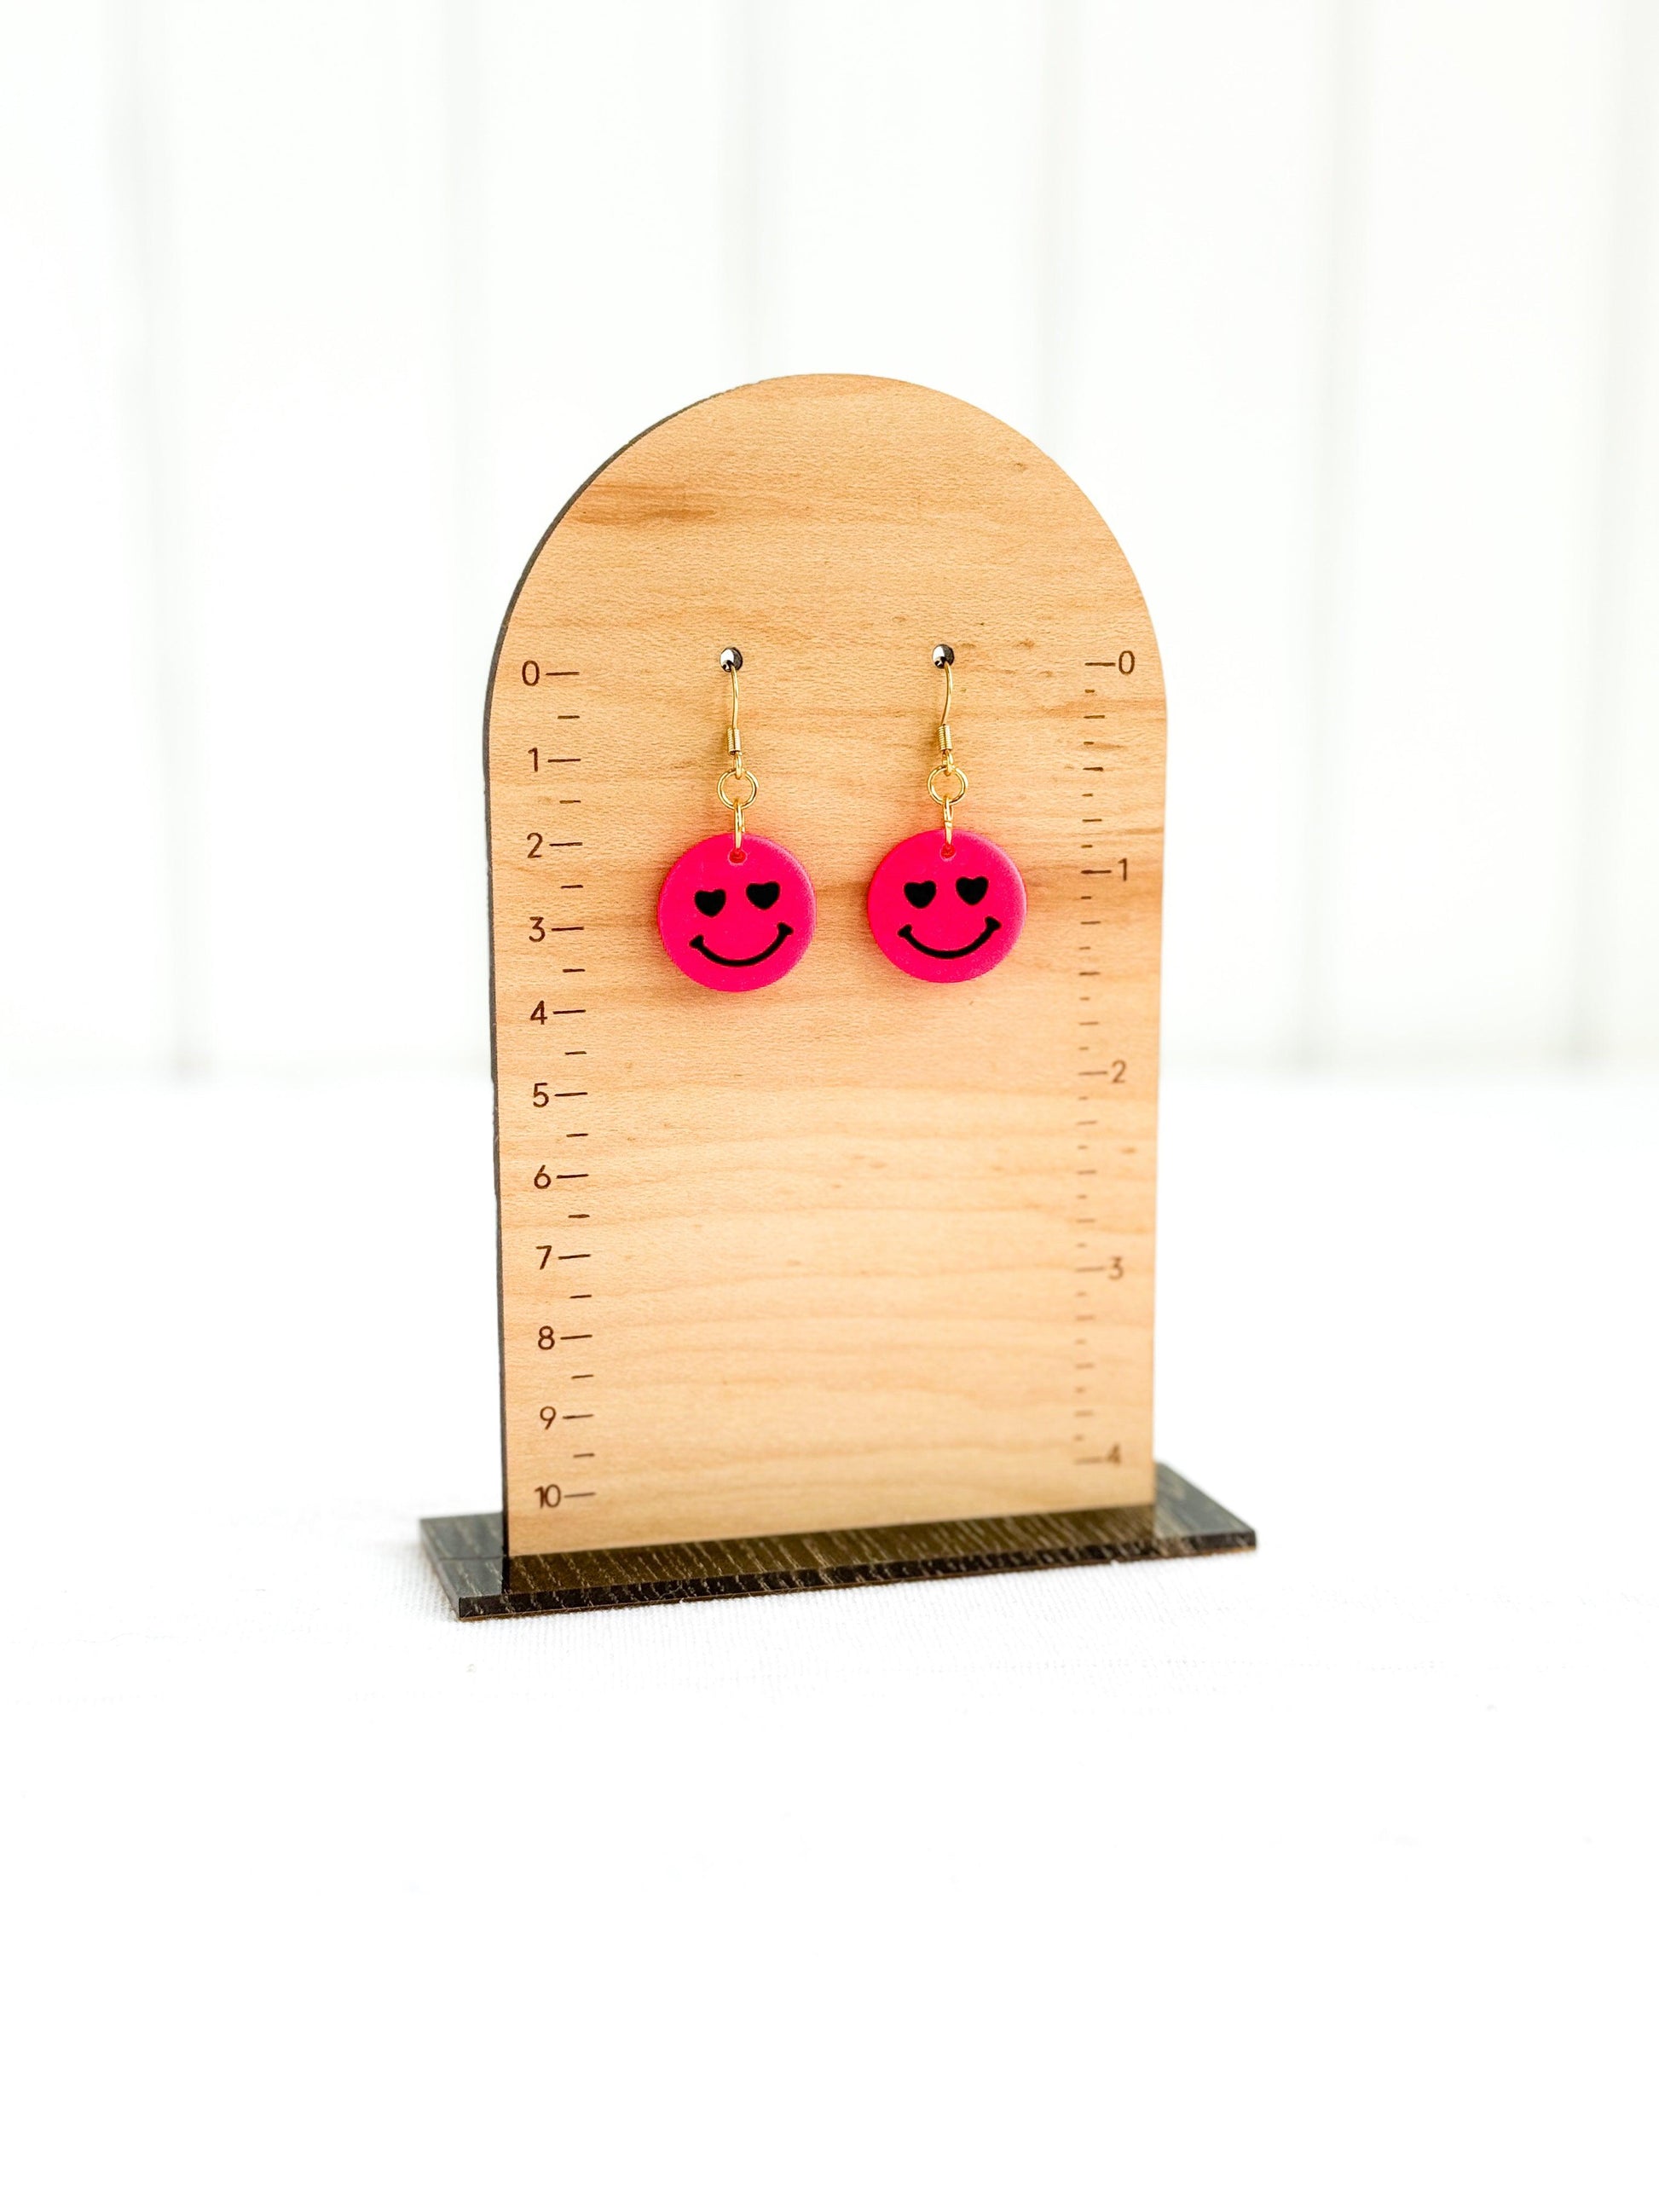 Hot Pink Smiley Face Earrings, Handmade Jewelry, Polymer Clay, Surgical Steel, Gifts for Women - Harbor to Gulf Co.